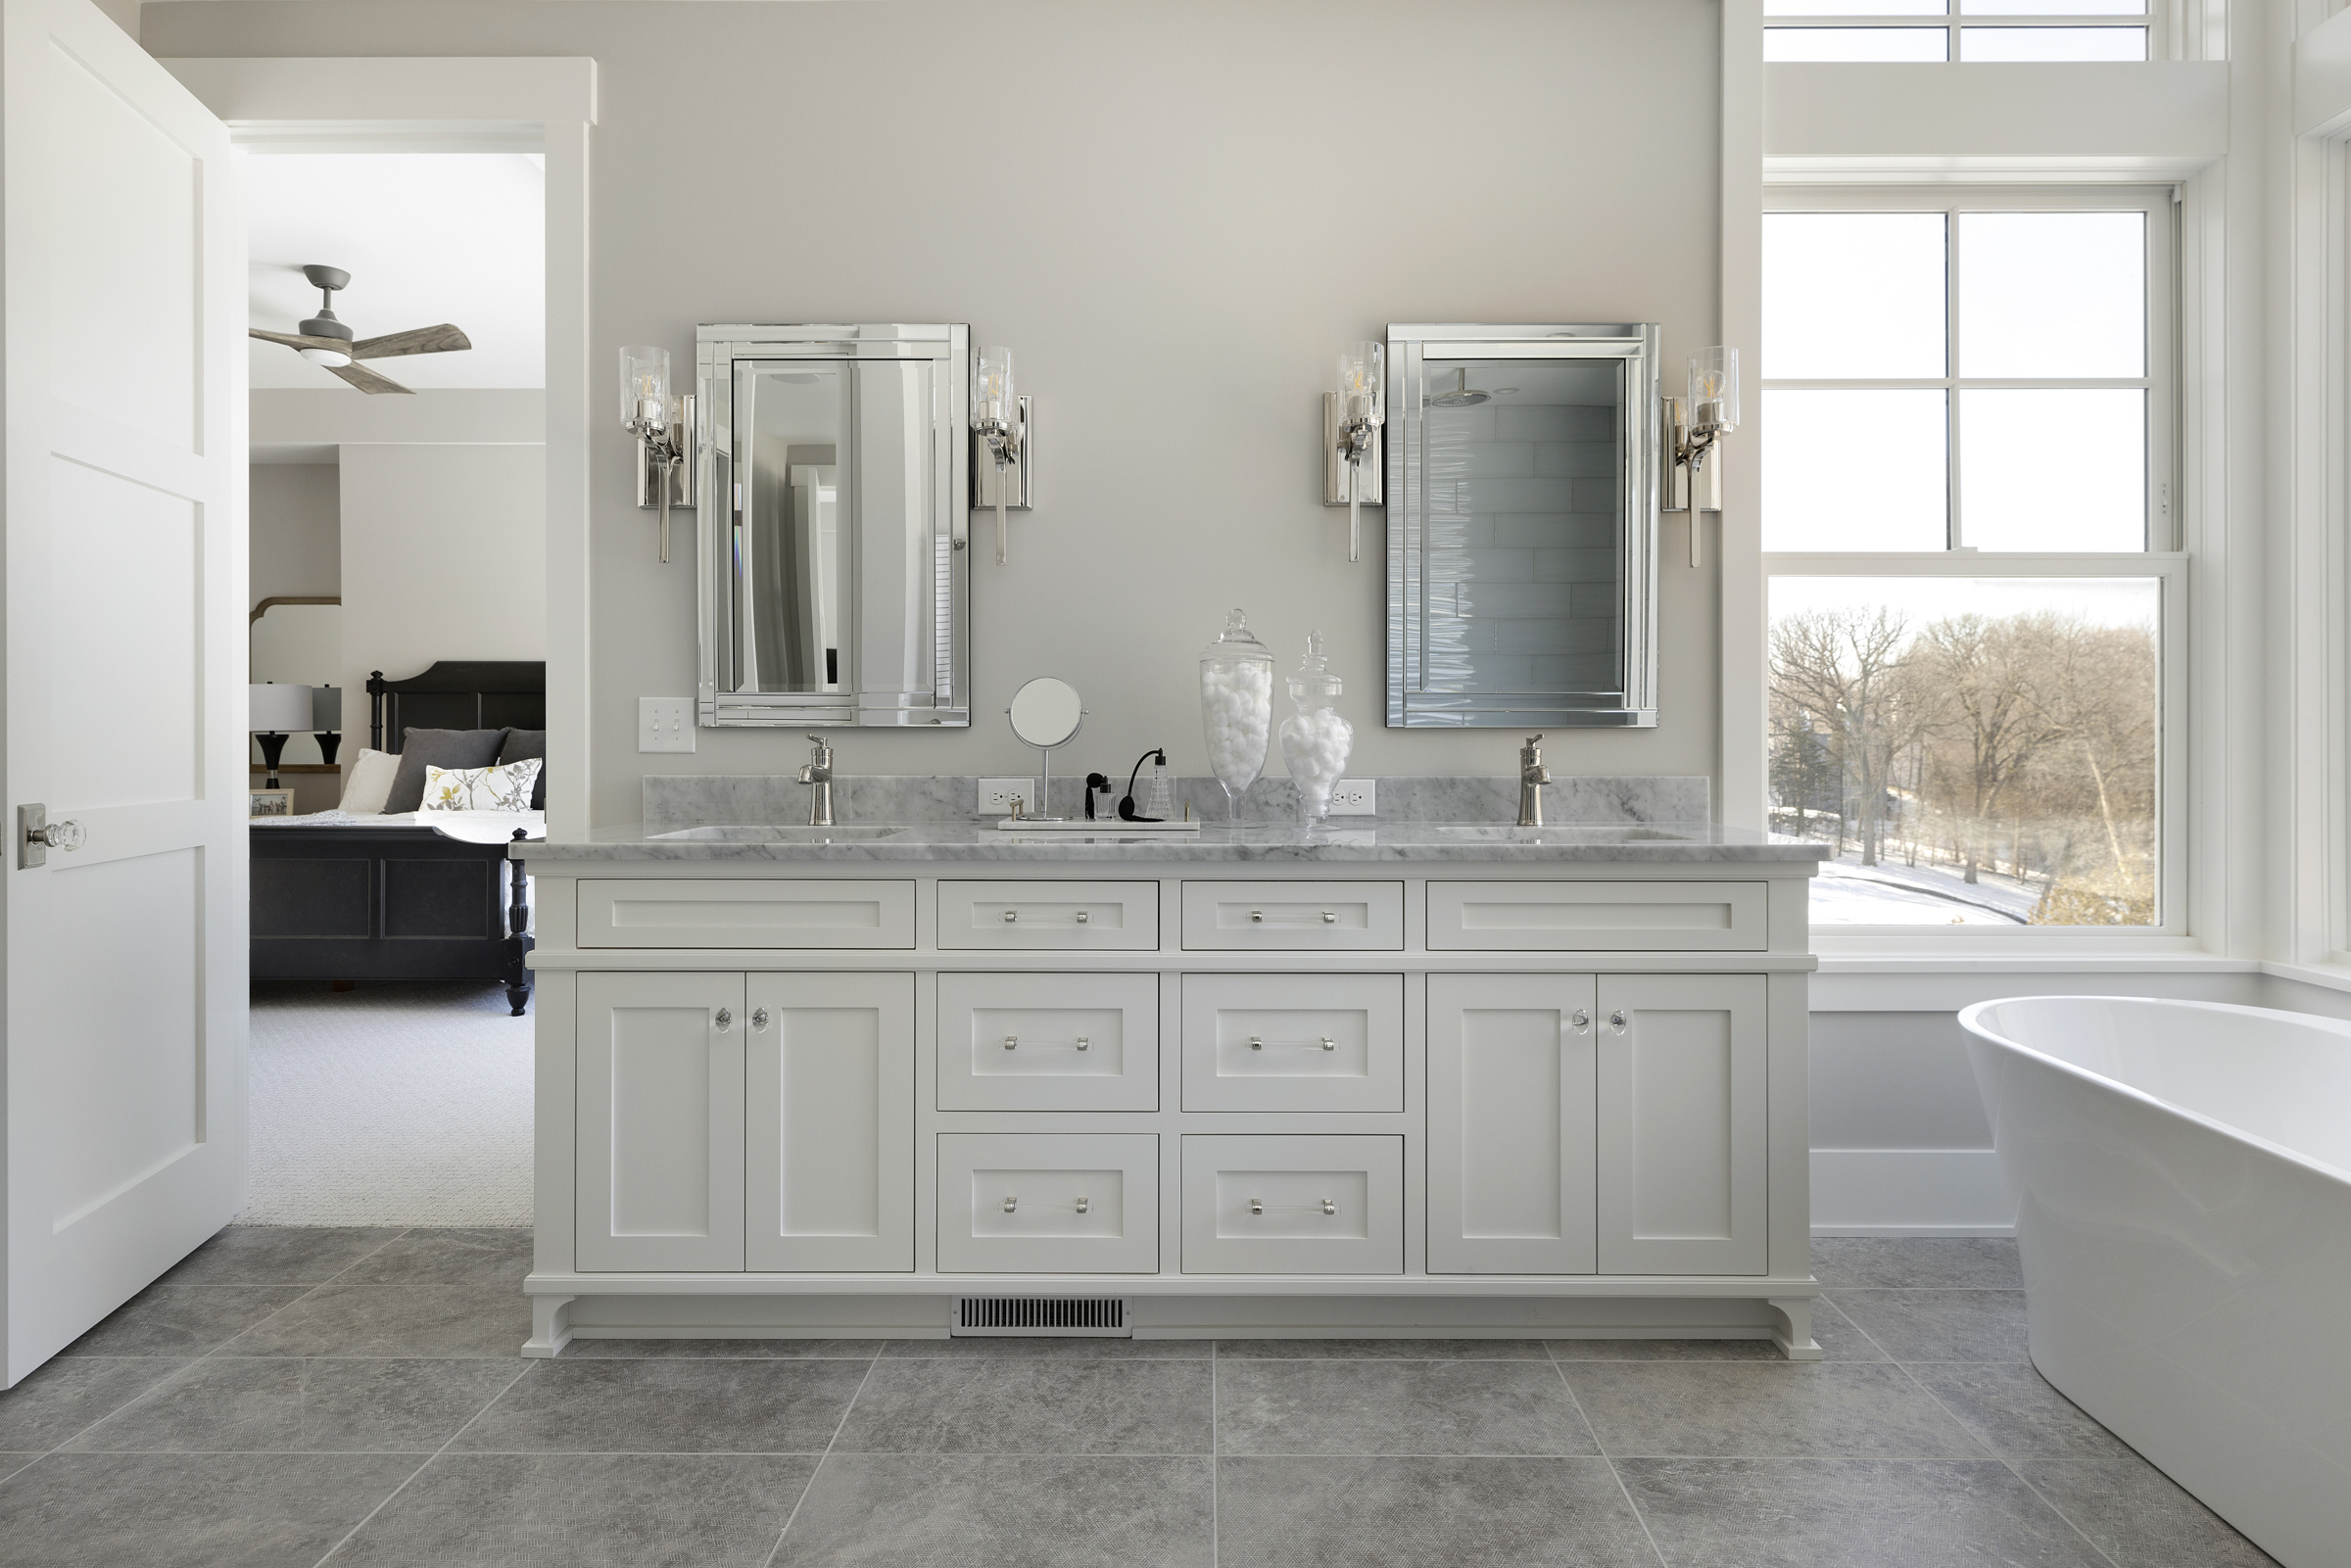 Master bathroom with a double vanity with white cabinets and marbled countertops and a soaker tub on the right